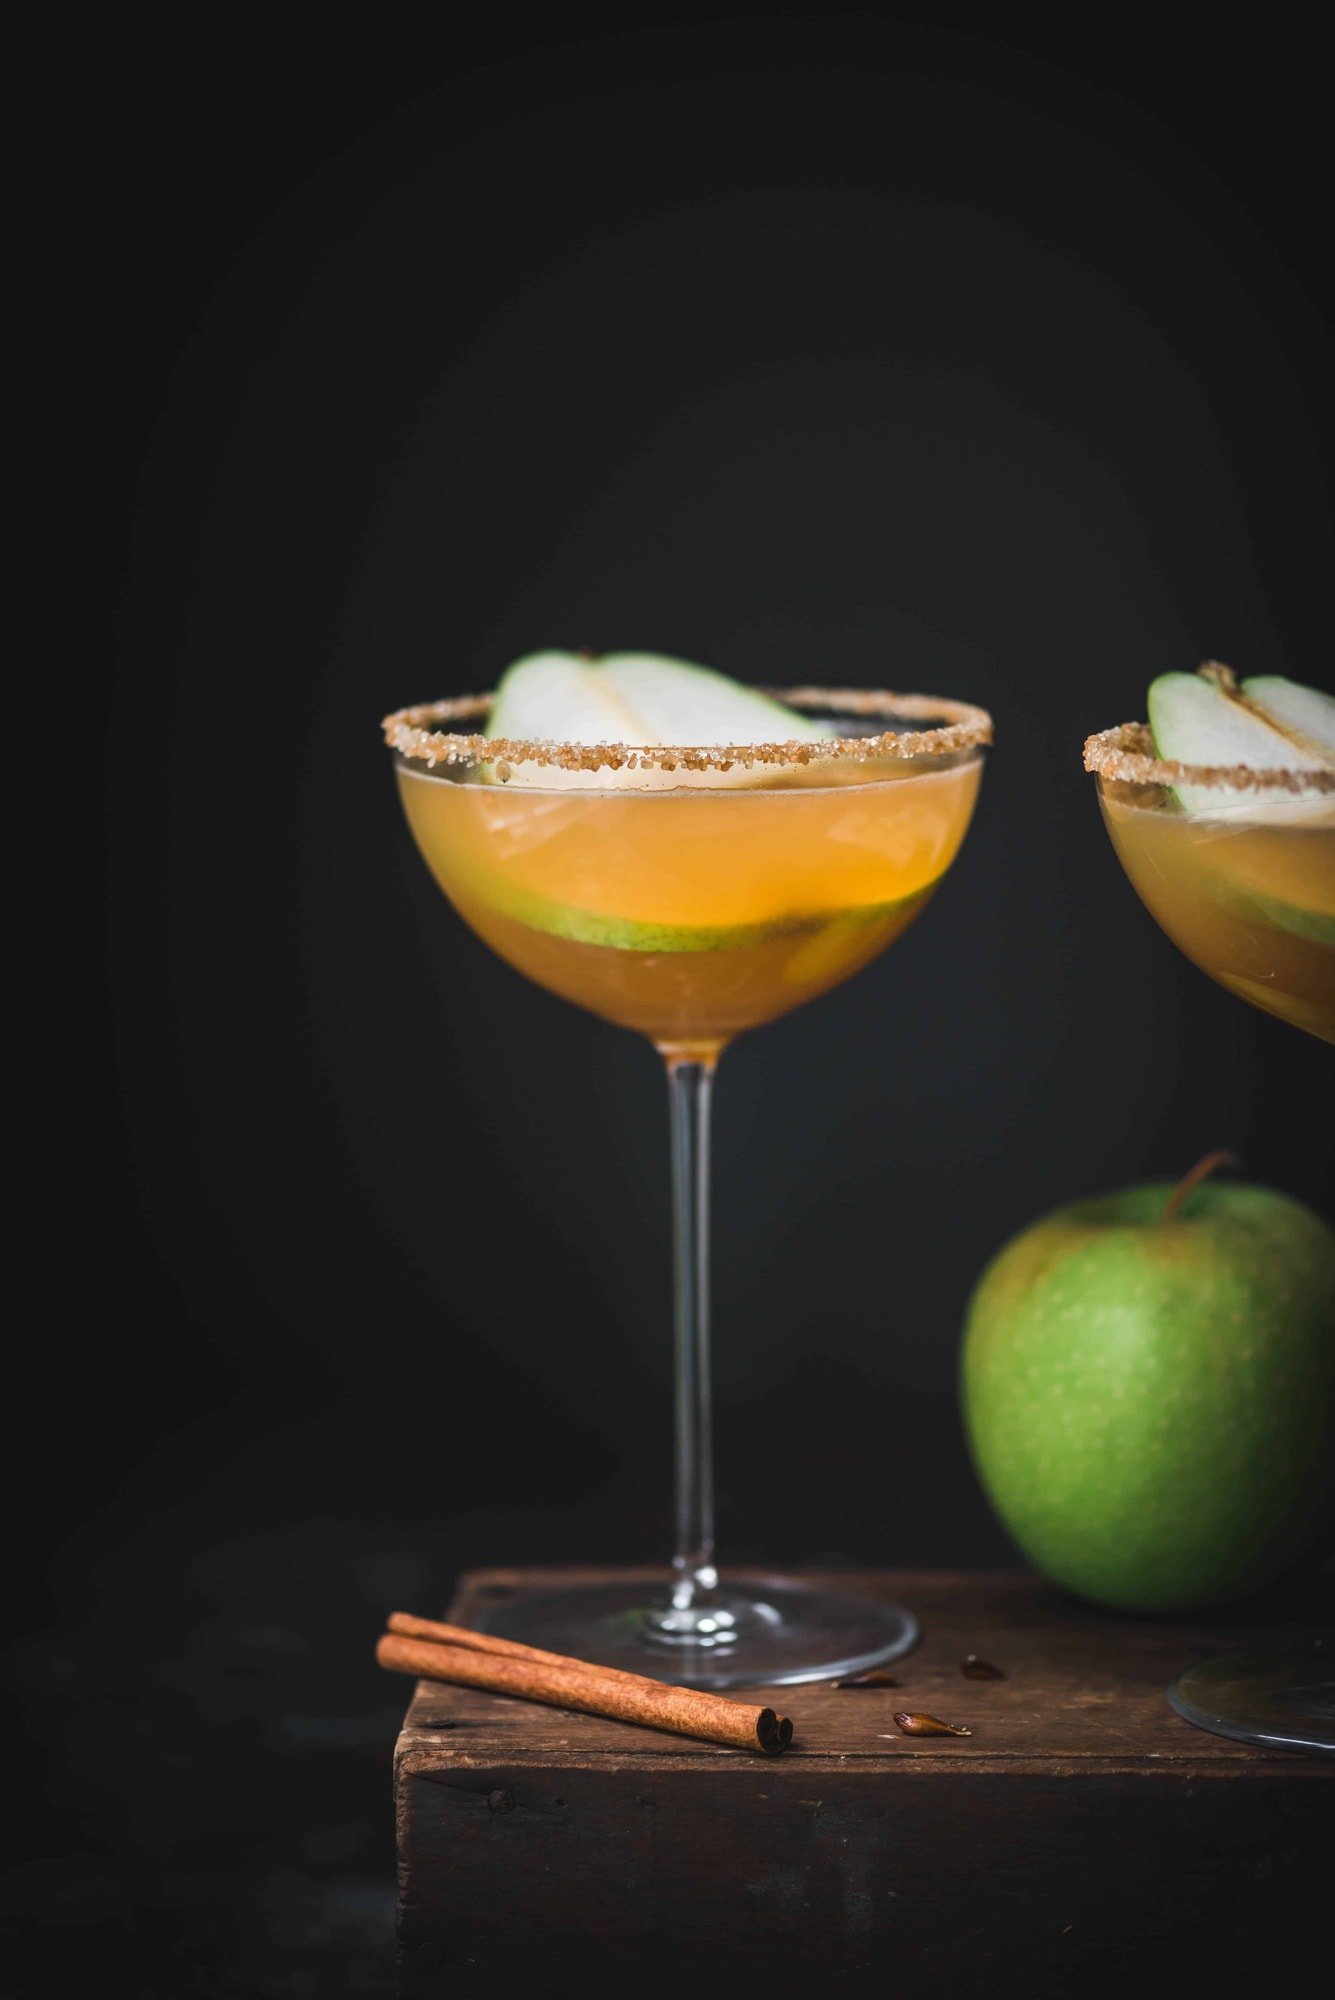 Apple cider pear martini in a long-stemmed coupe glass with dark moody background